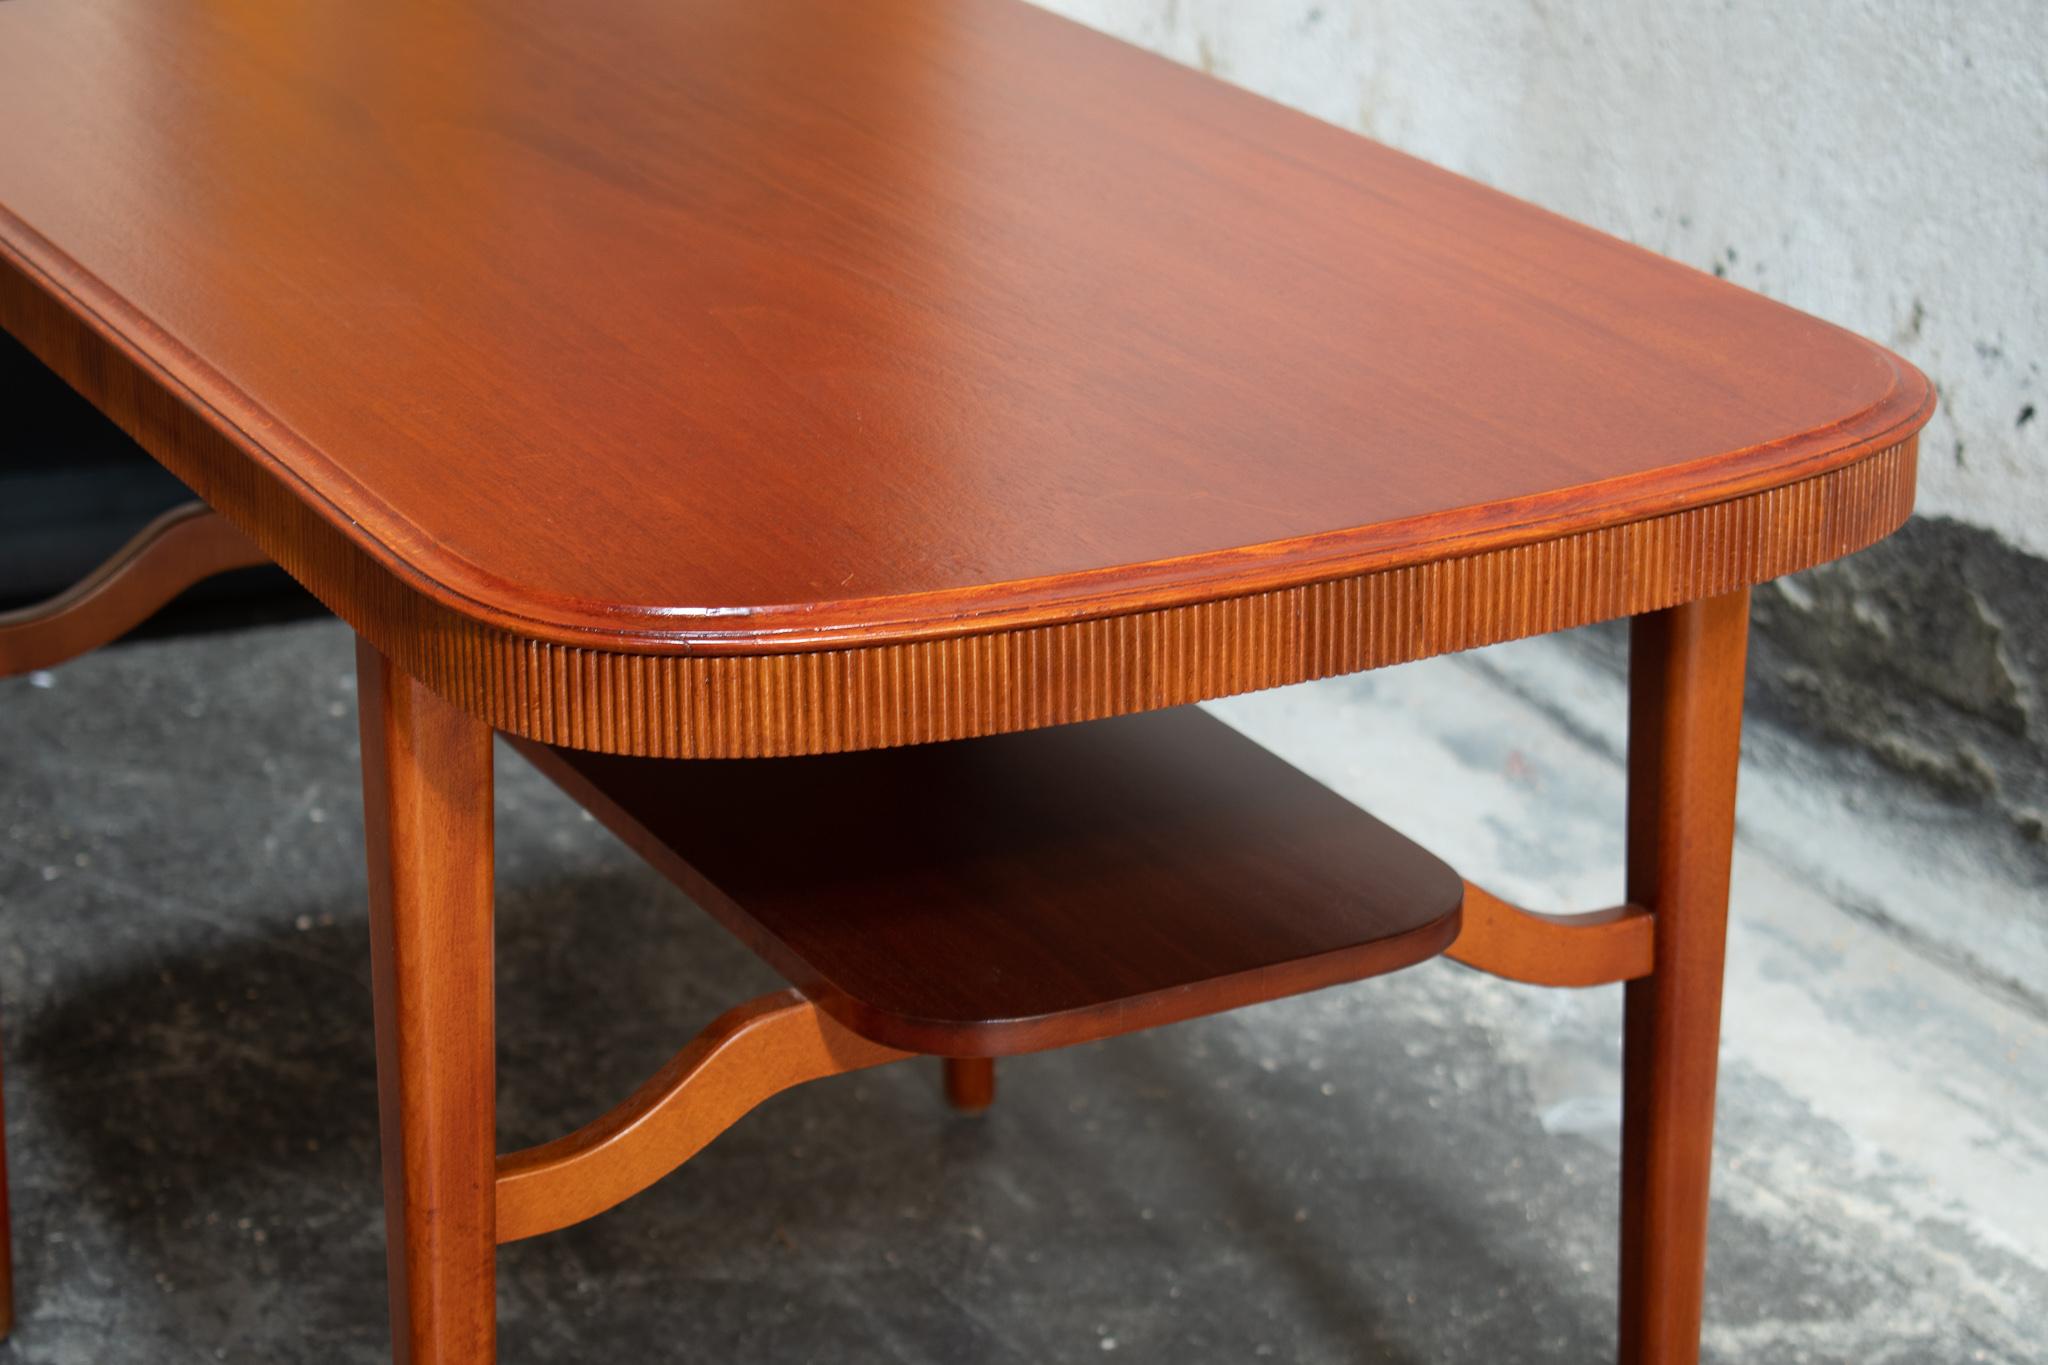 Mid-20th Century Mid-Century Modern Mahogany End or Coffee Table with Shelf, Sweden, c. 1950 For Sale